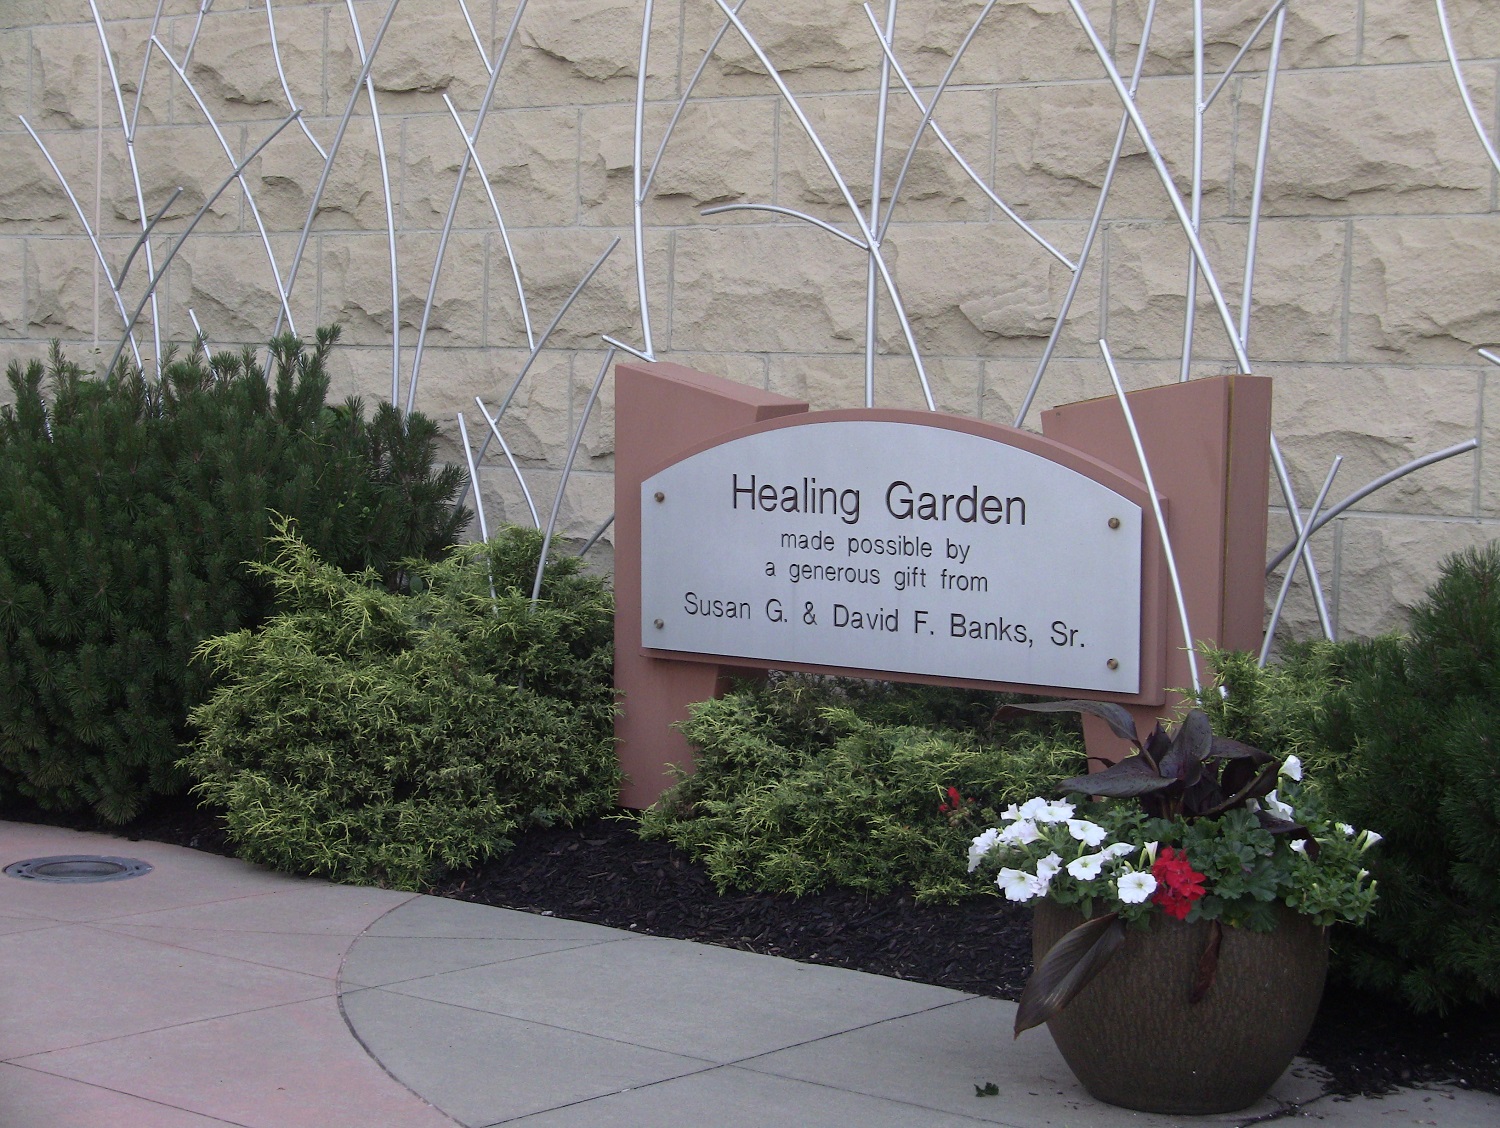 Therapeutic Landscaping For Healthcare Facilities: 5 Healing Garden Tips